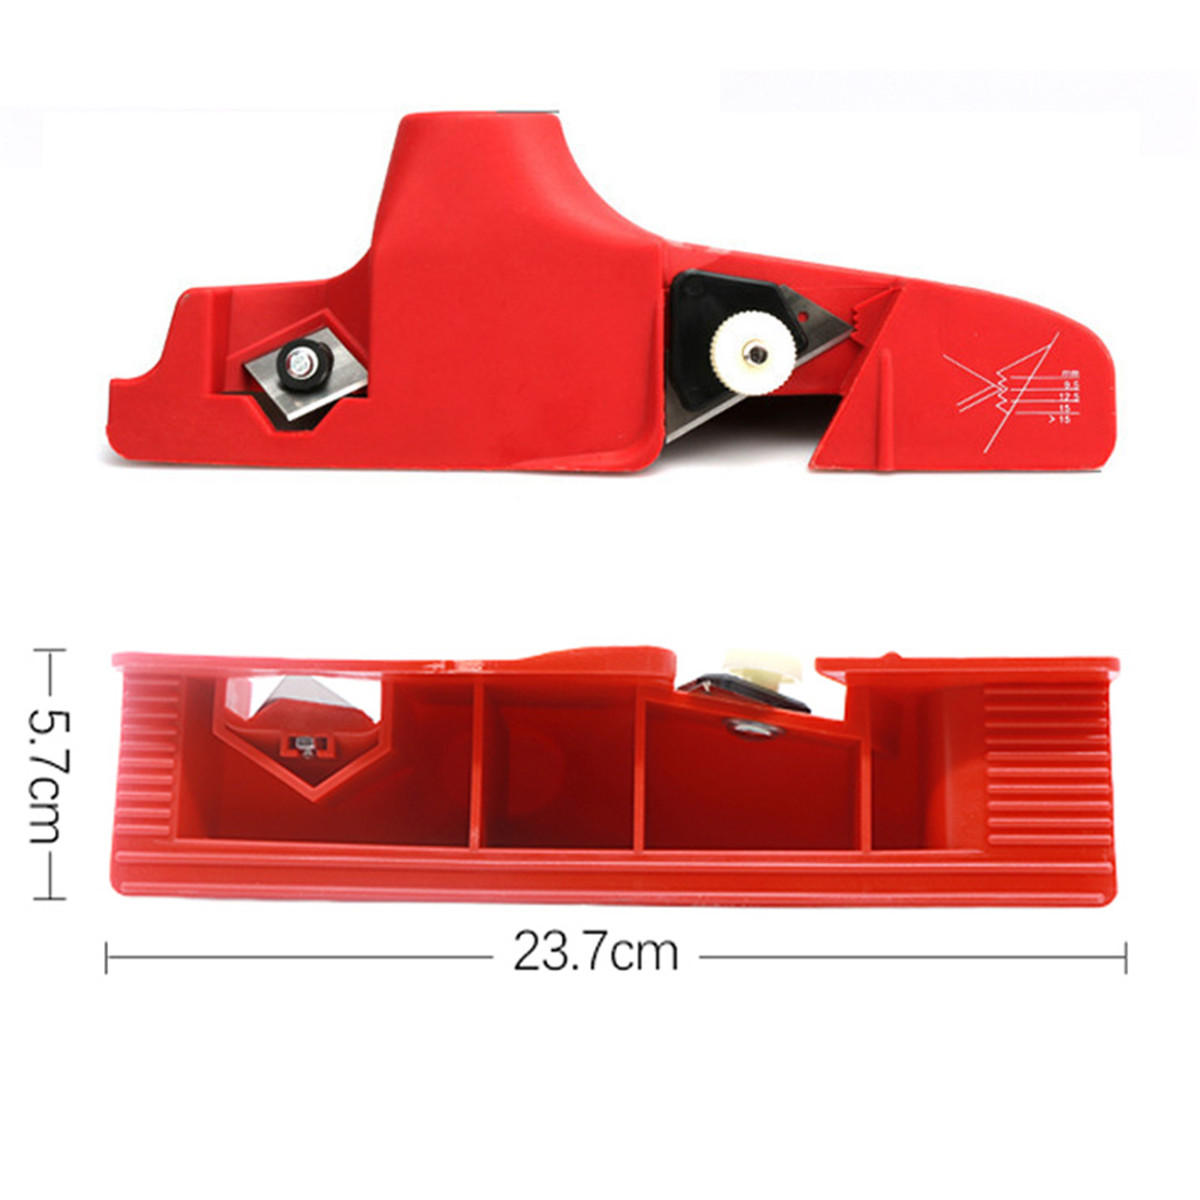 Edge-Planing-Machine-For-Gypsum-Board-Cement-Plate-Trimming-Tools-Kit-Plasterboard-1593955-4